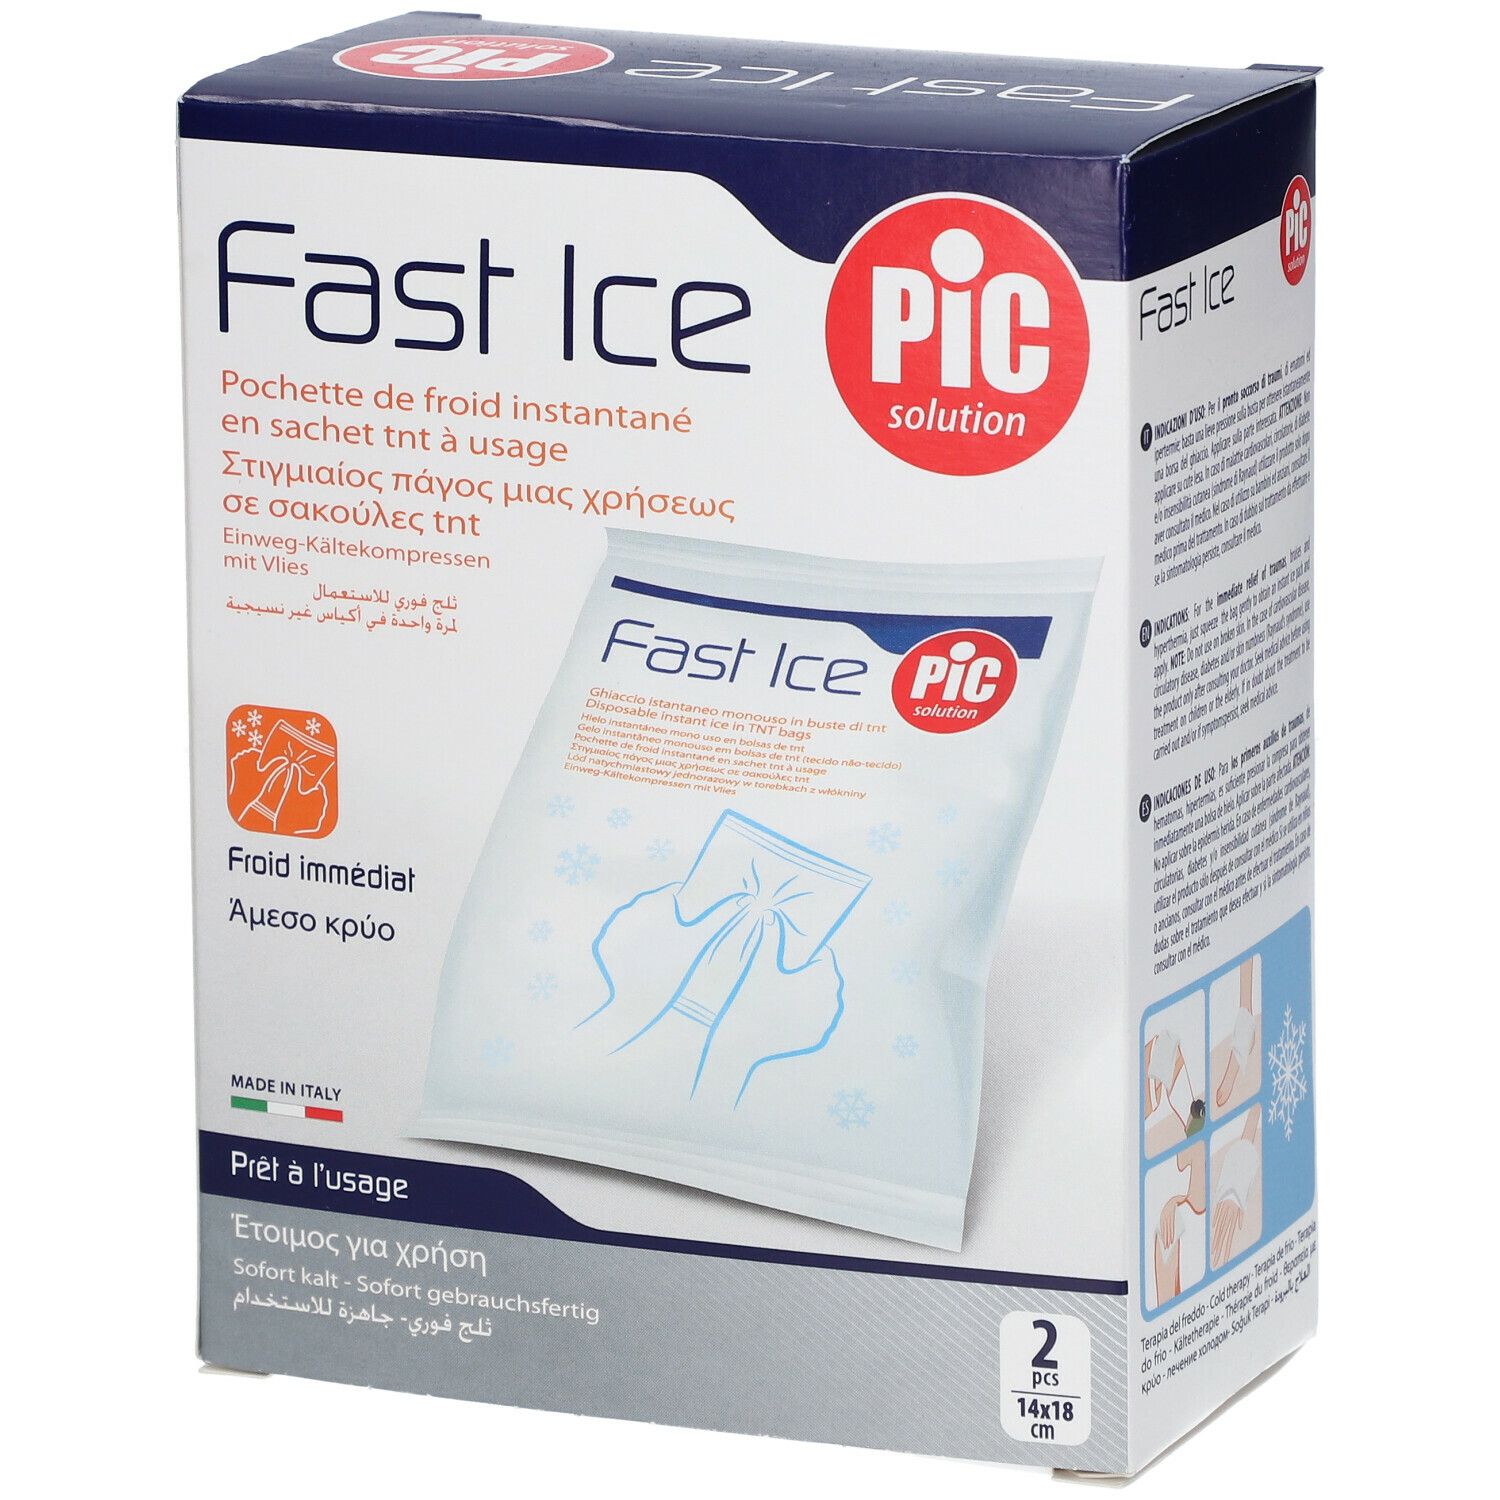 Pic Solution Fast Ice Ghiaccio Istantaneo in Busta TNT